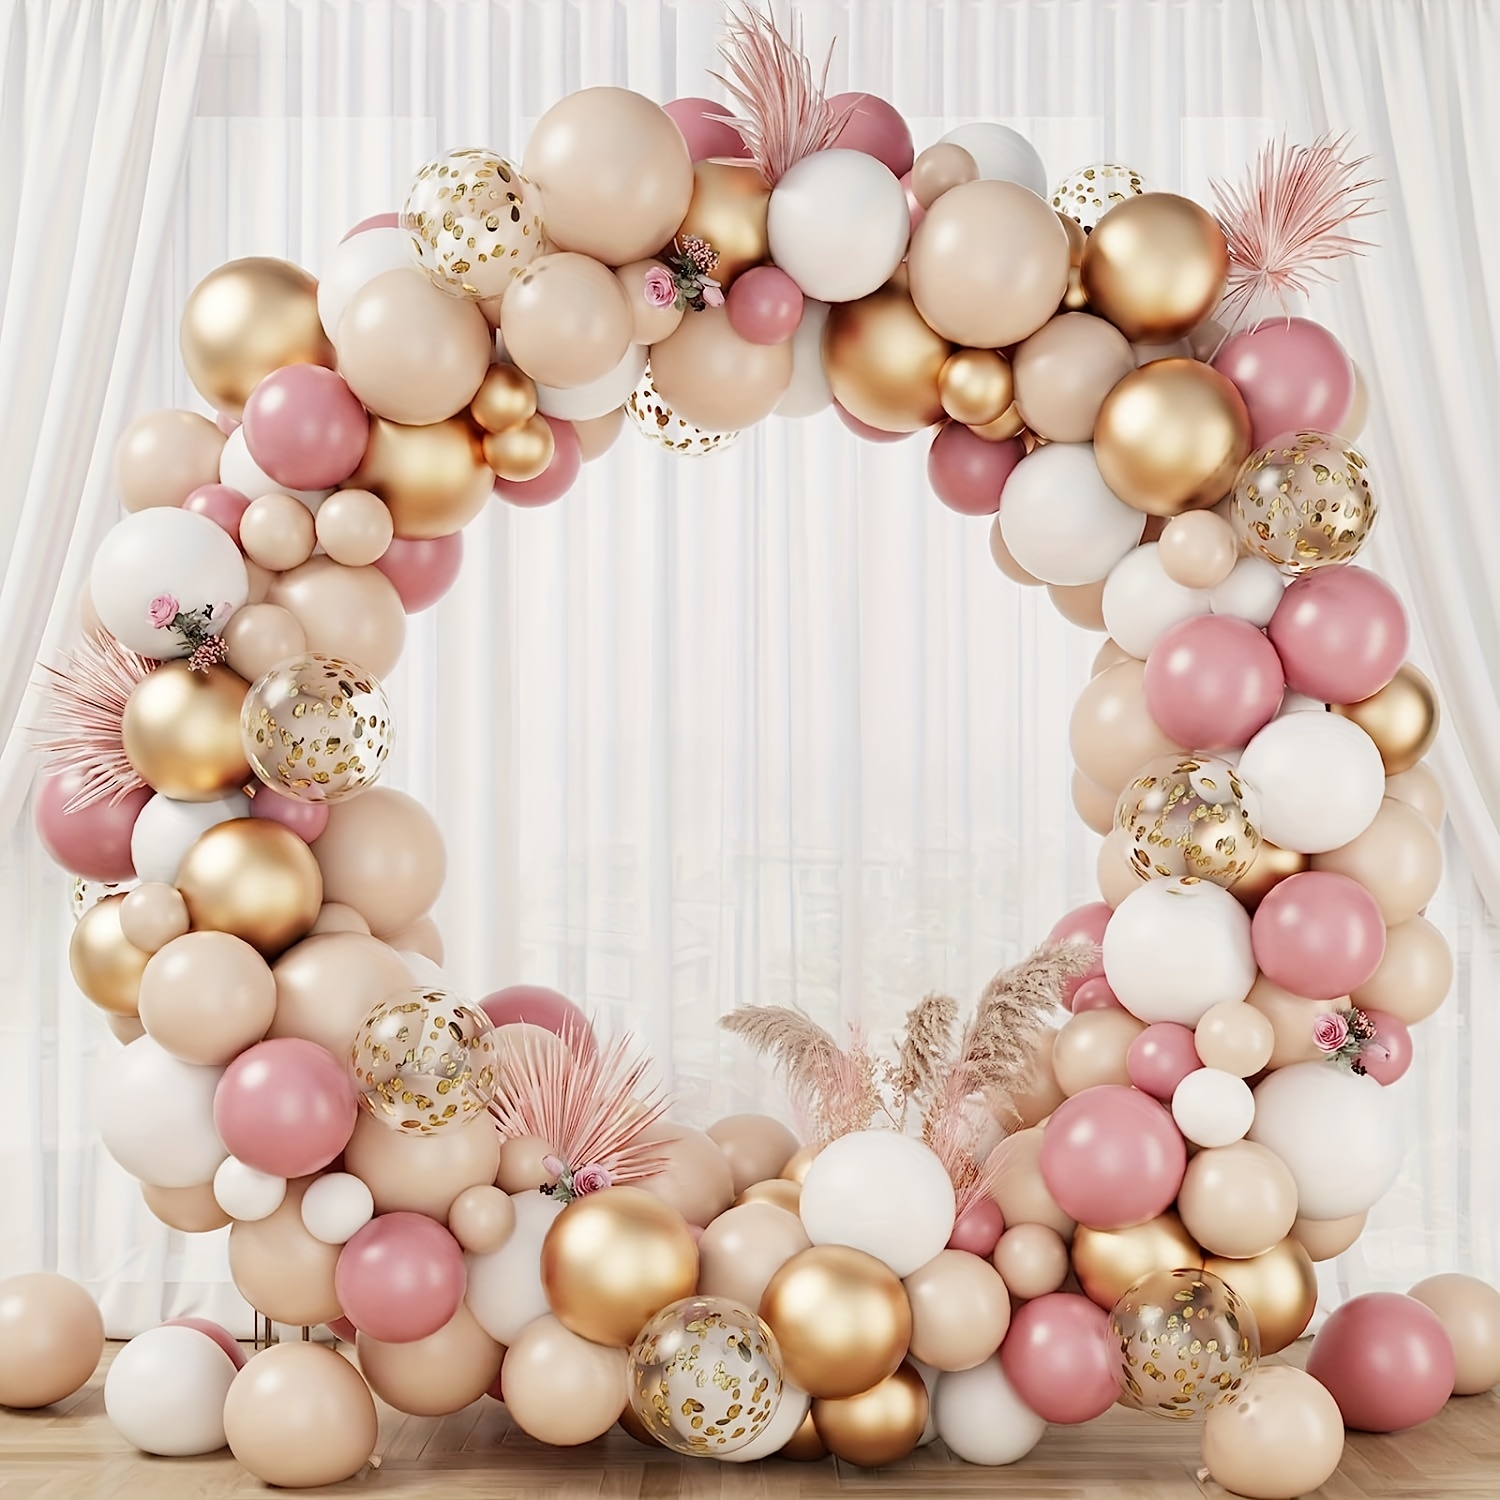 

112pcs, Blush Retro Pink Balloons Garland Arch Kit For Birthday Party Wedding Baby Shower Decorations